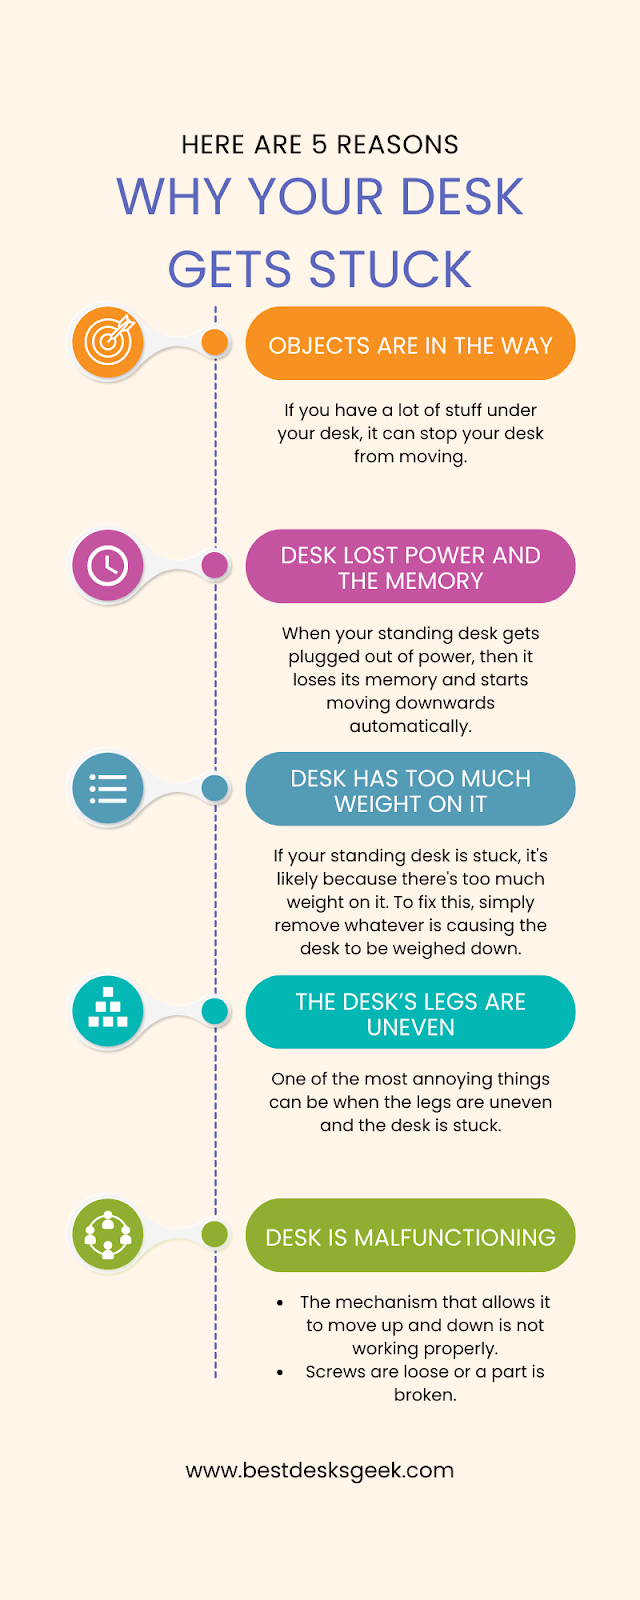 An infographic showing Reasons Why Your Desk Gets Stuck